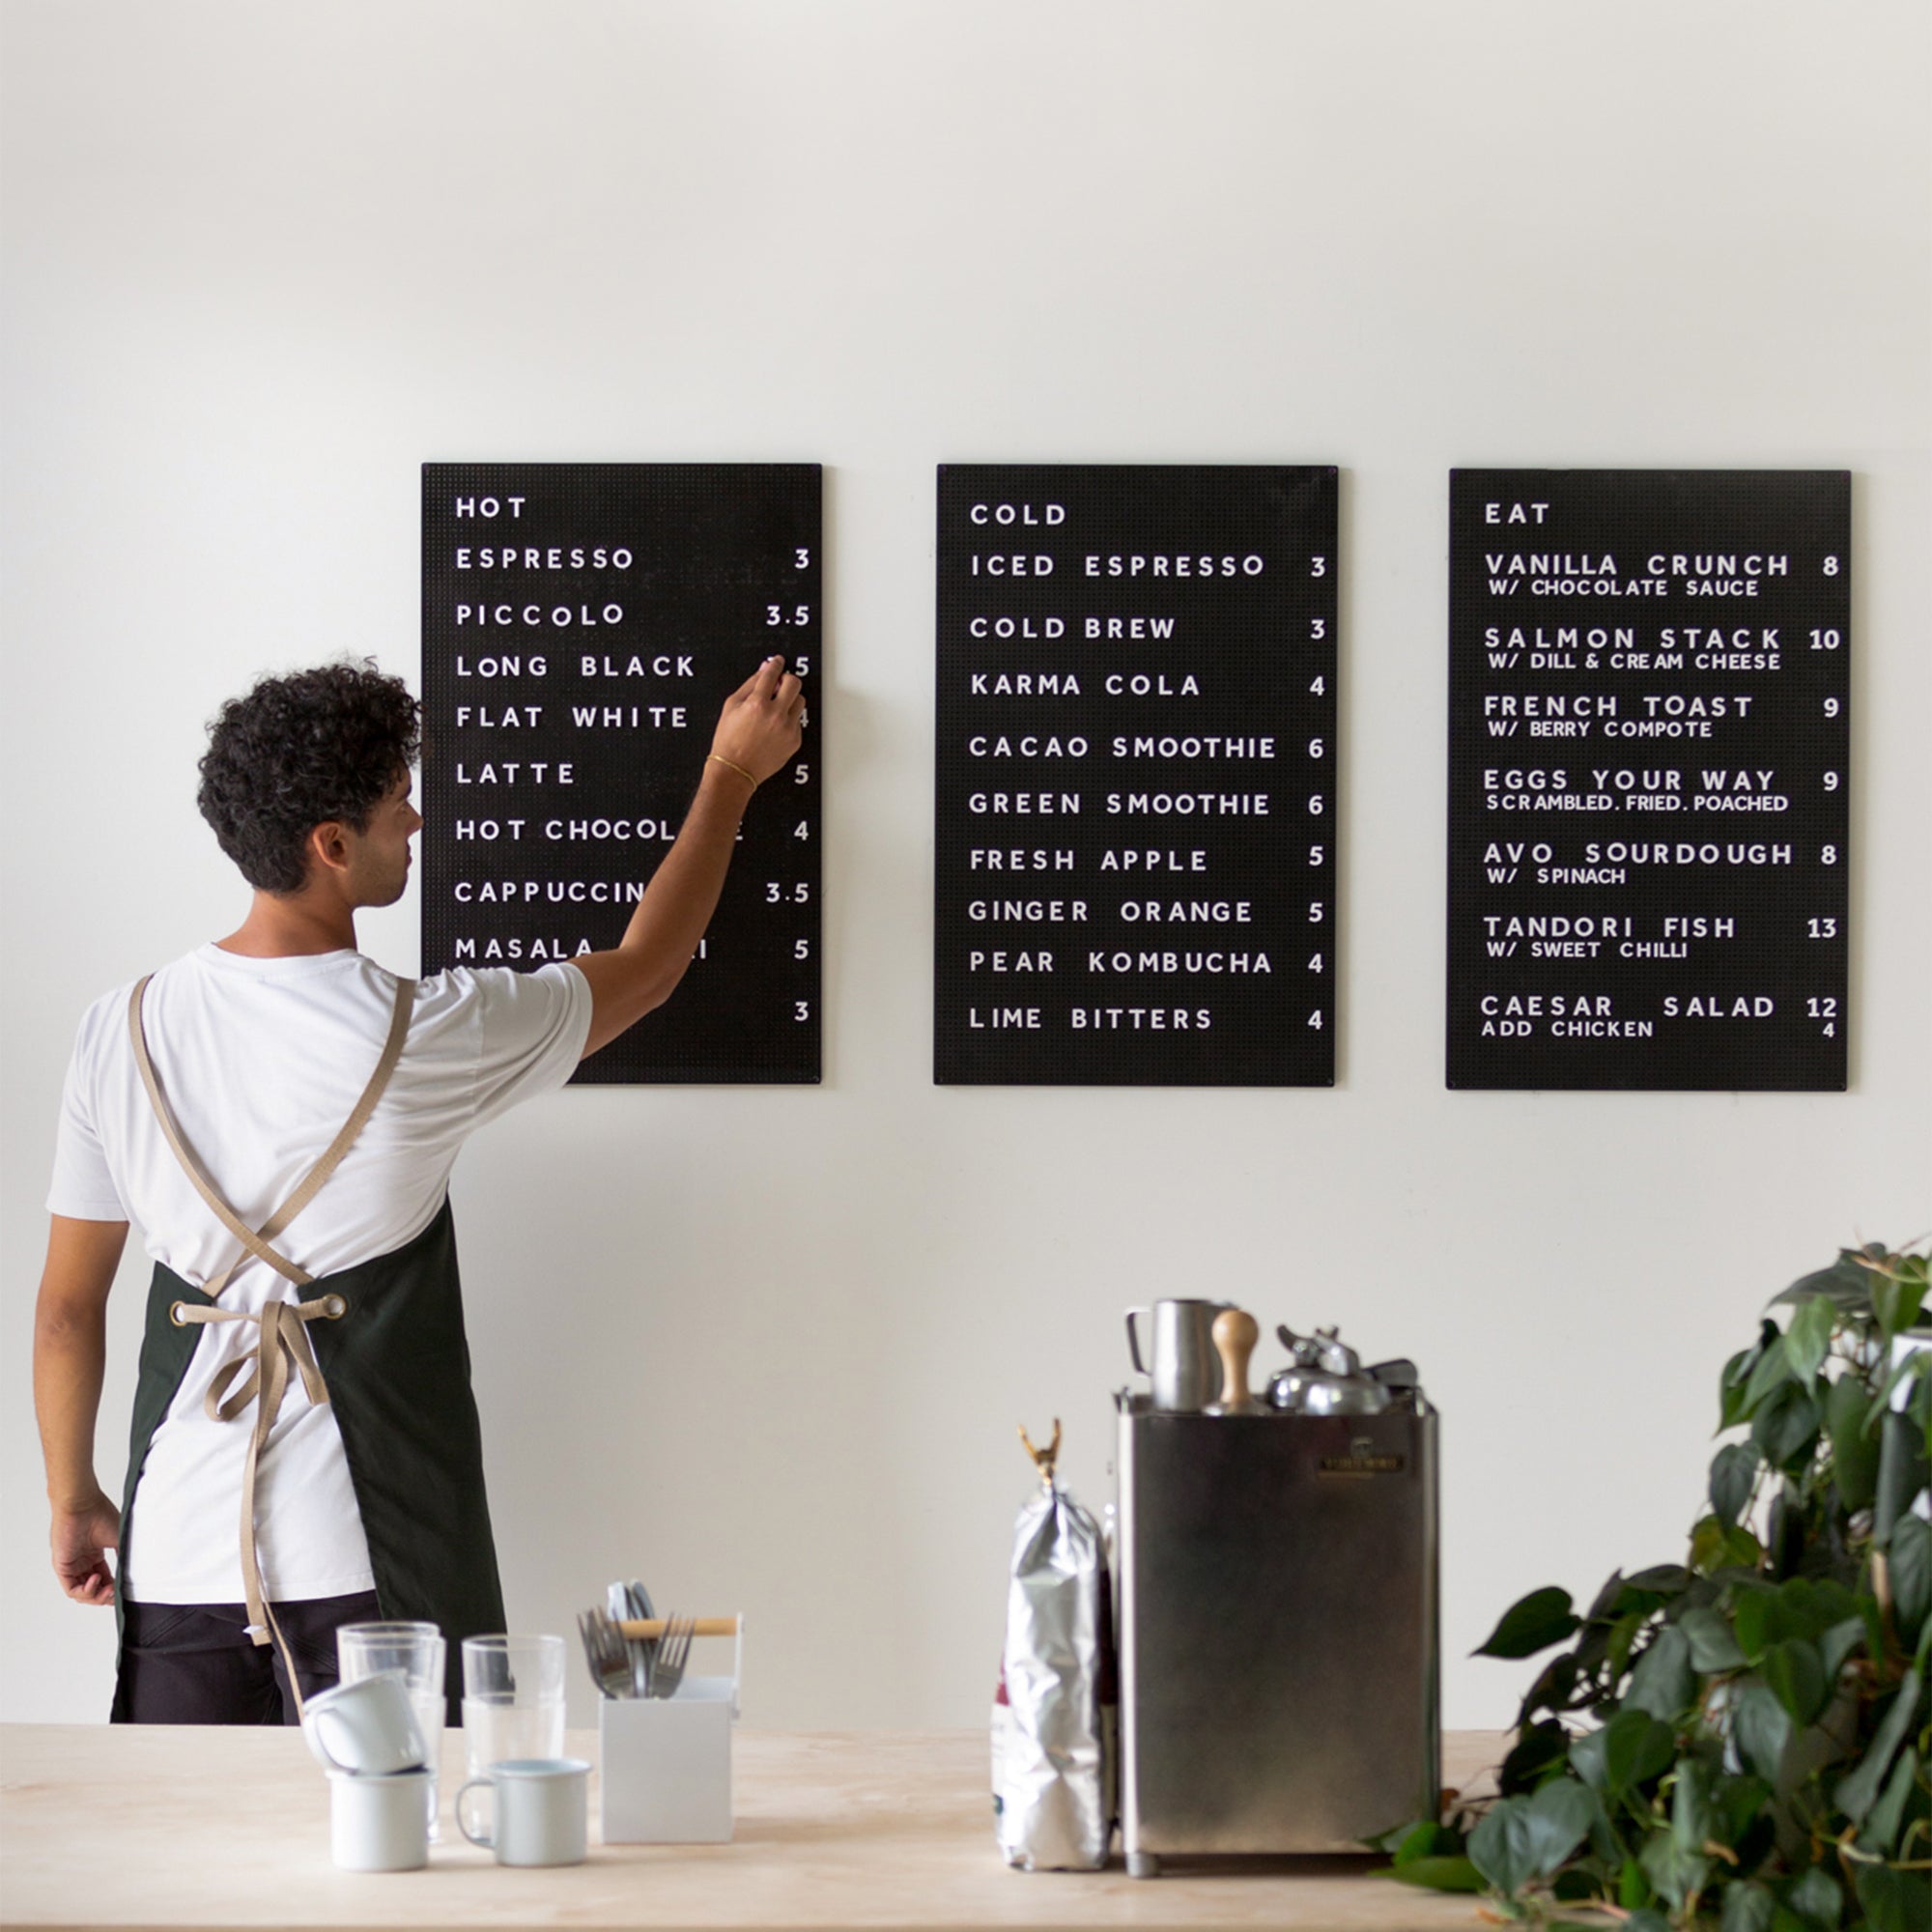 How to Install the Park Letter Board